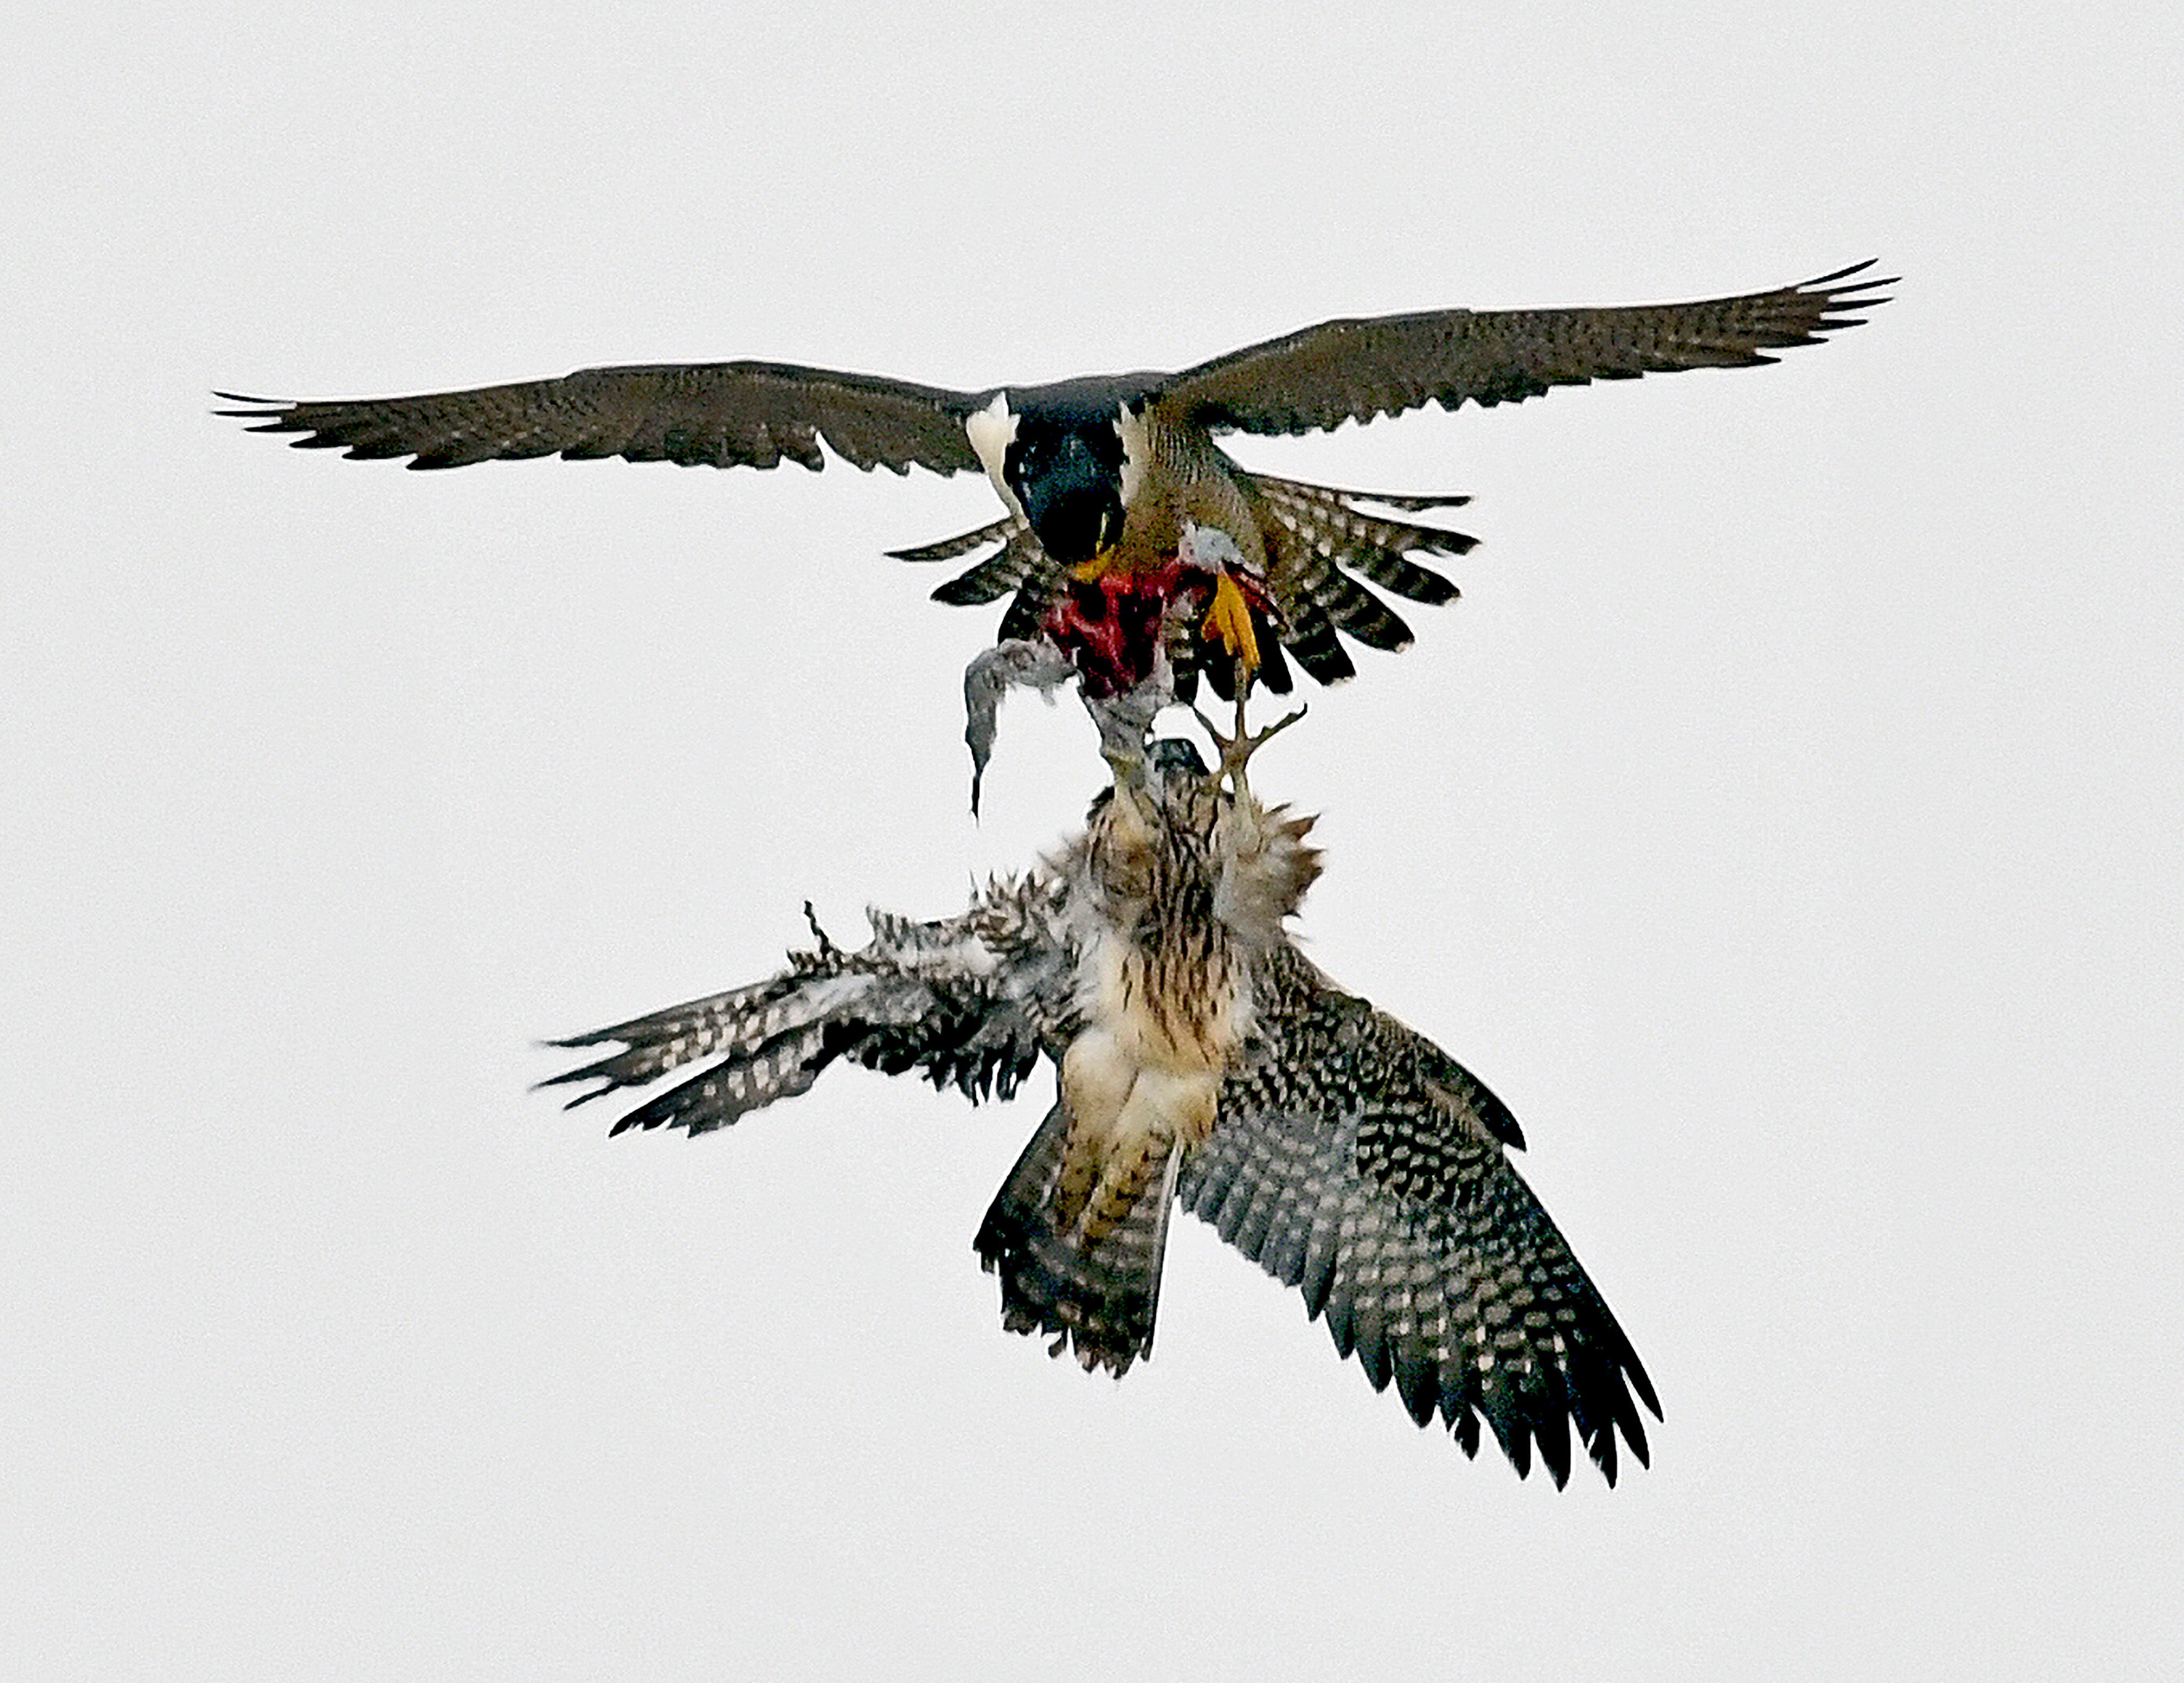 Peregrine falcons transfer food to one another over Los Angeles. Watching these raptors dive through the air at 350km/h would leave anyone awestruck, but awe of nature is something many city dwellers have lost. Photo: Getty Images